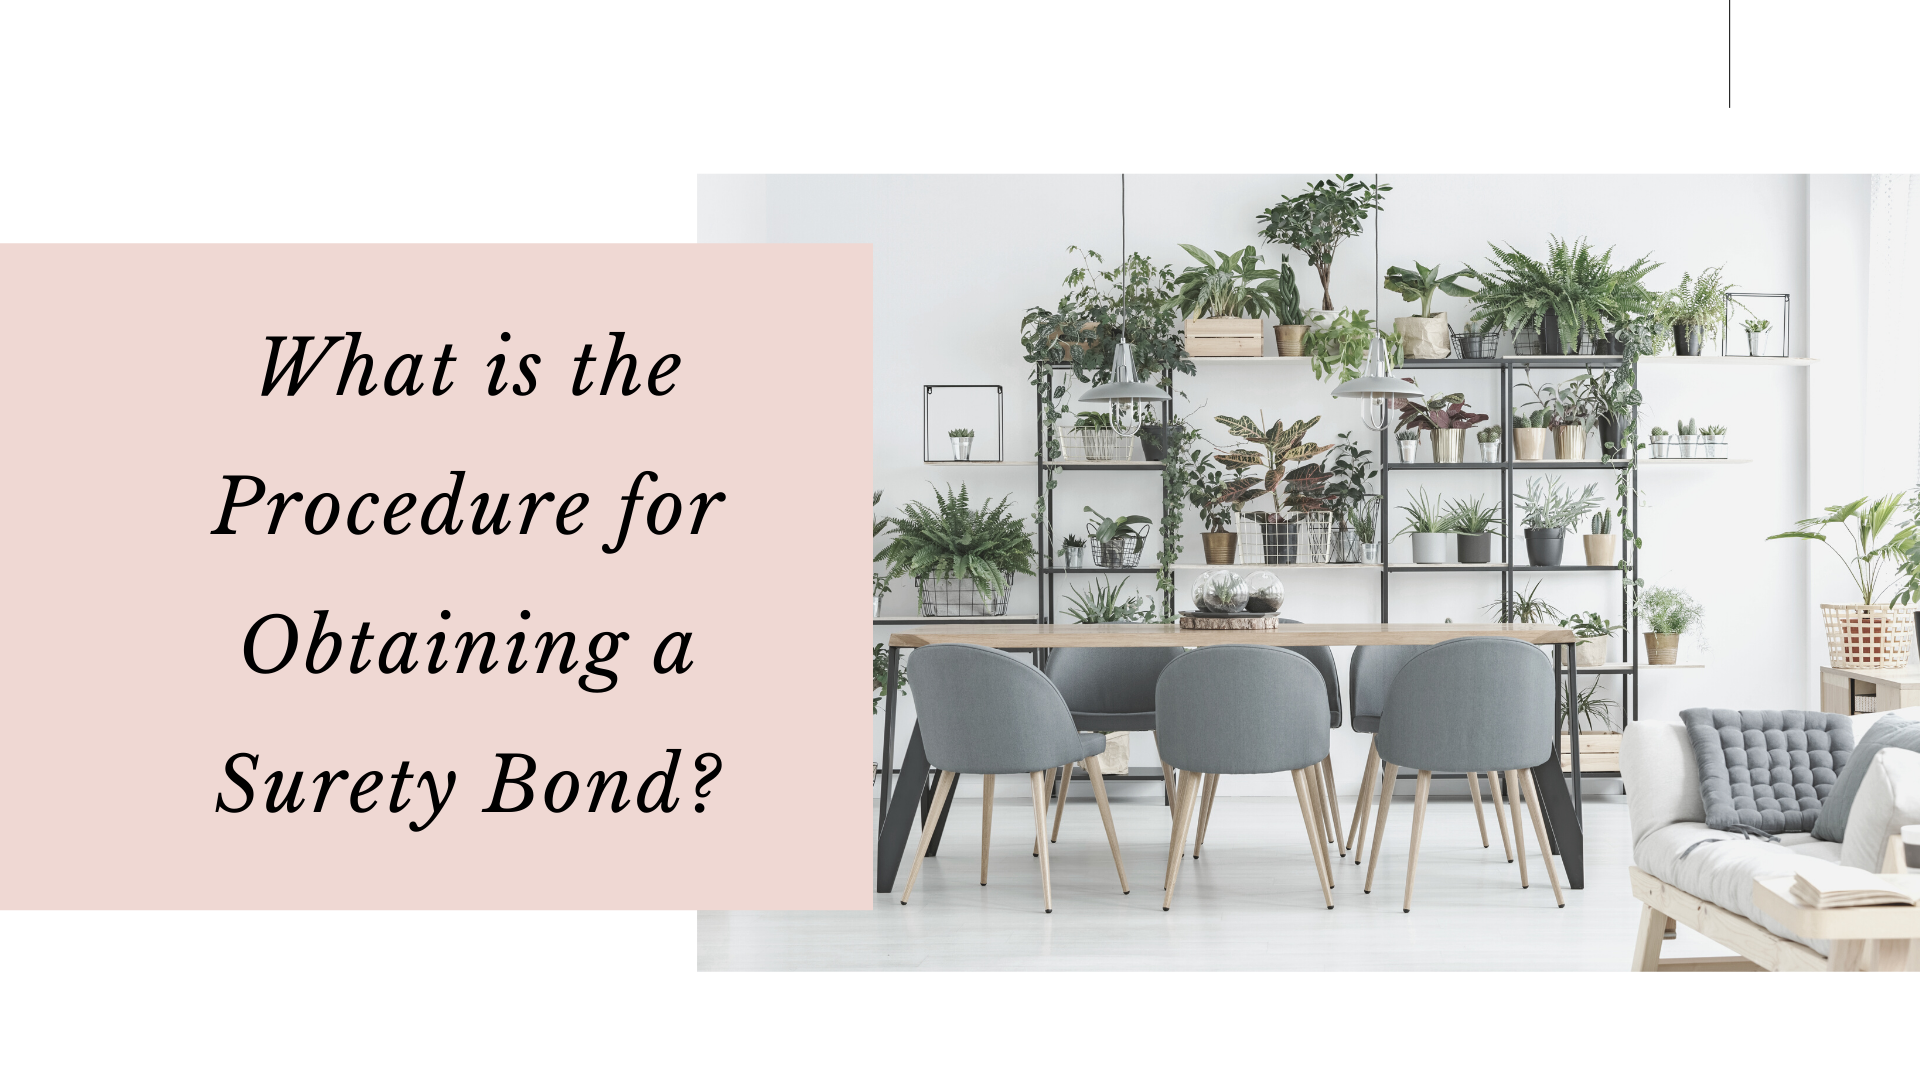 surety bond - What does it take to get a surety bond - office